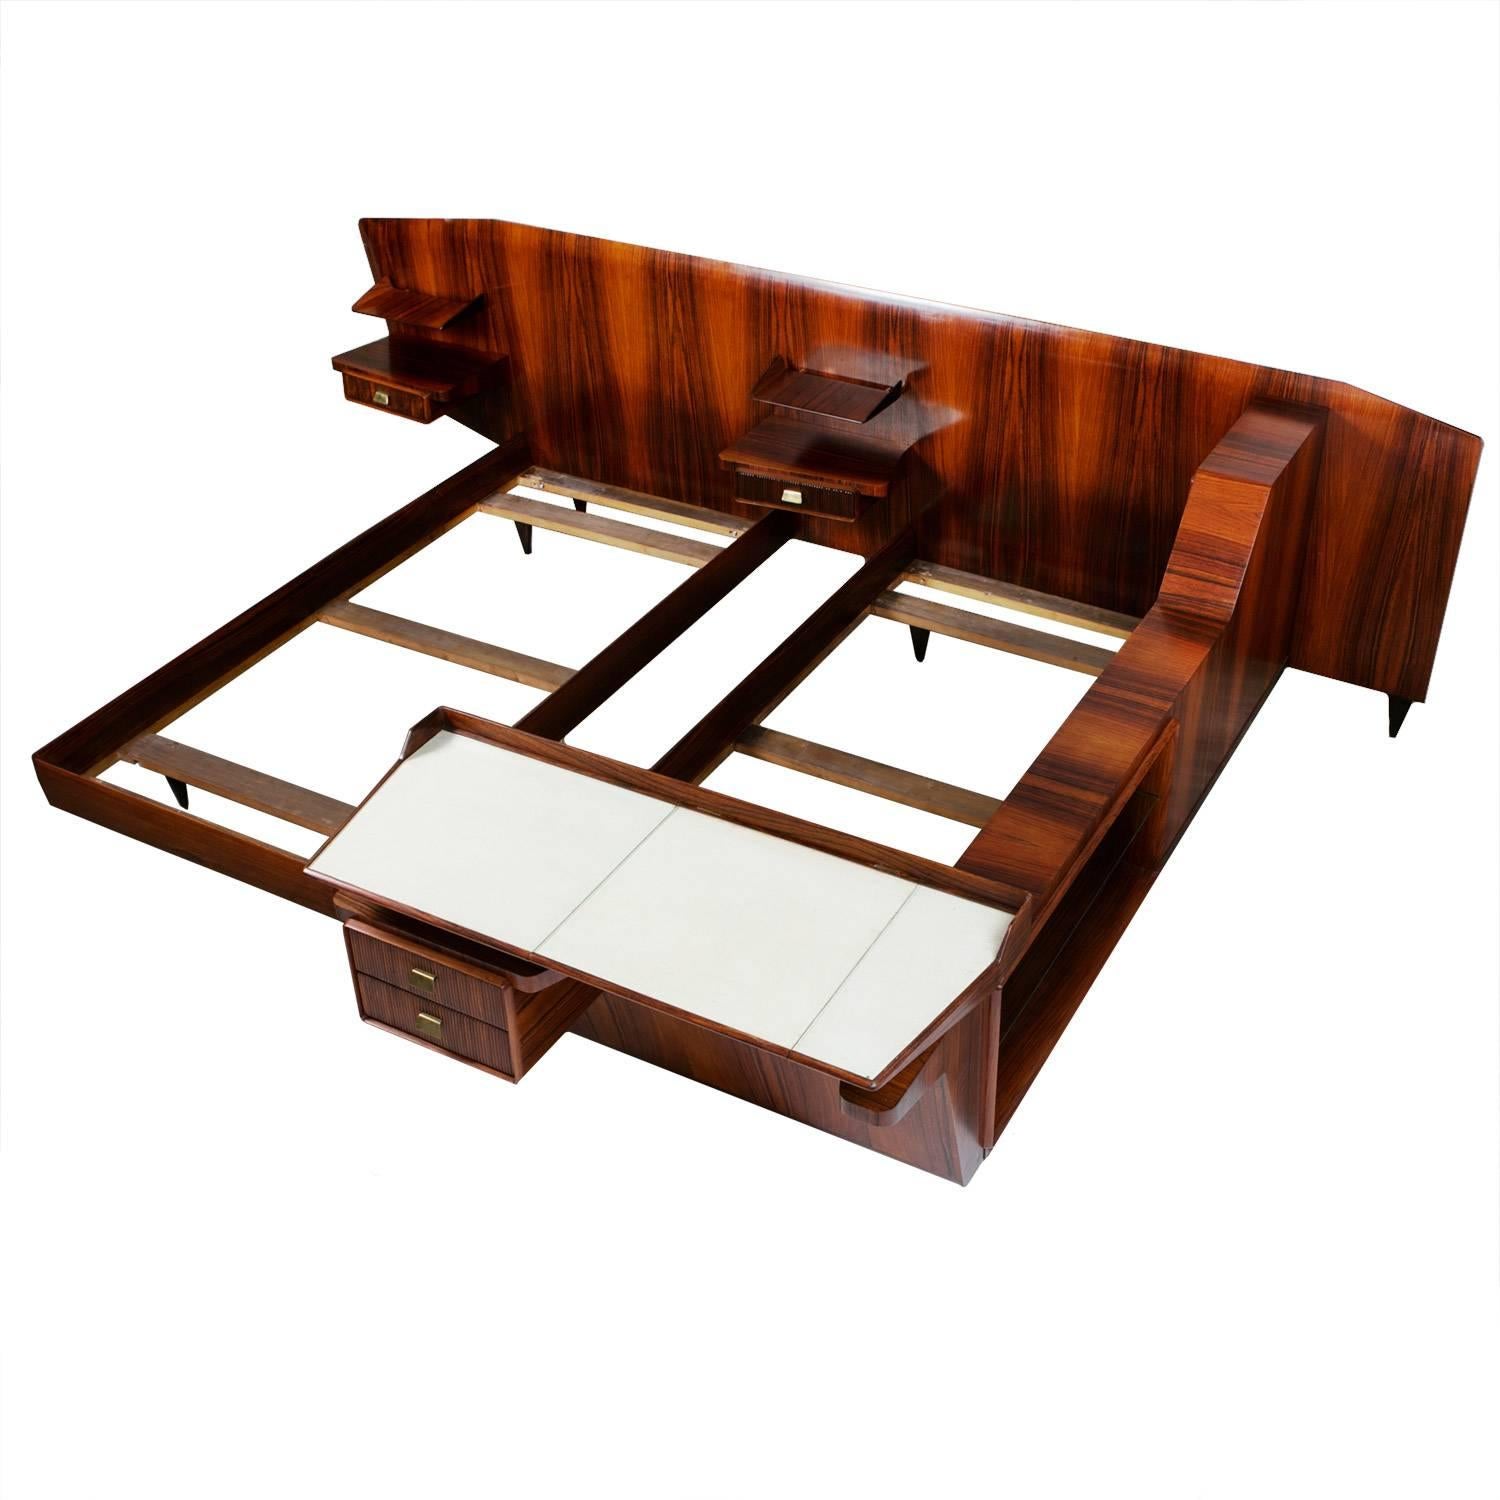 Important and unique double bed by Gio Ponti executed by Egidio Proserpio, Barzano'.
Rosewood bed with asymmetrical 